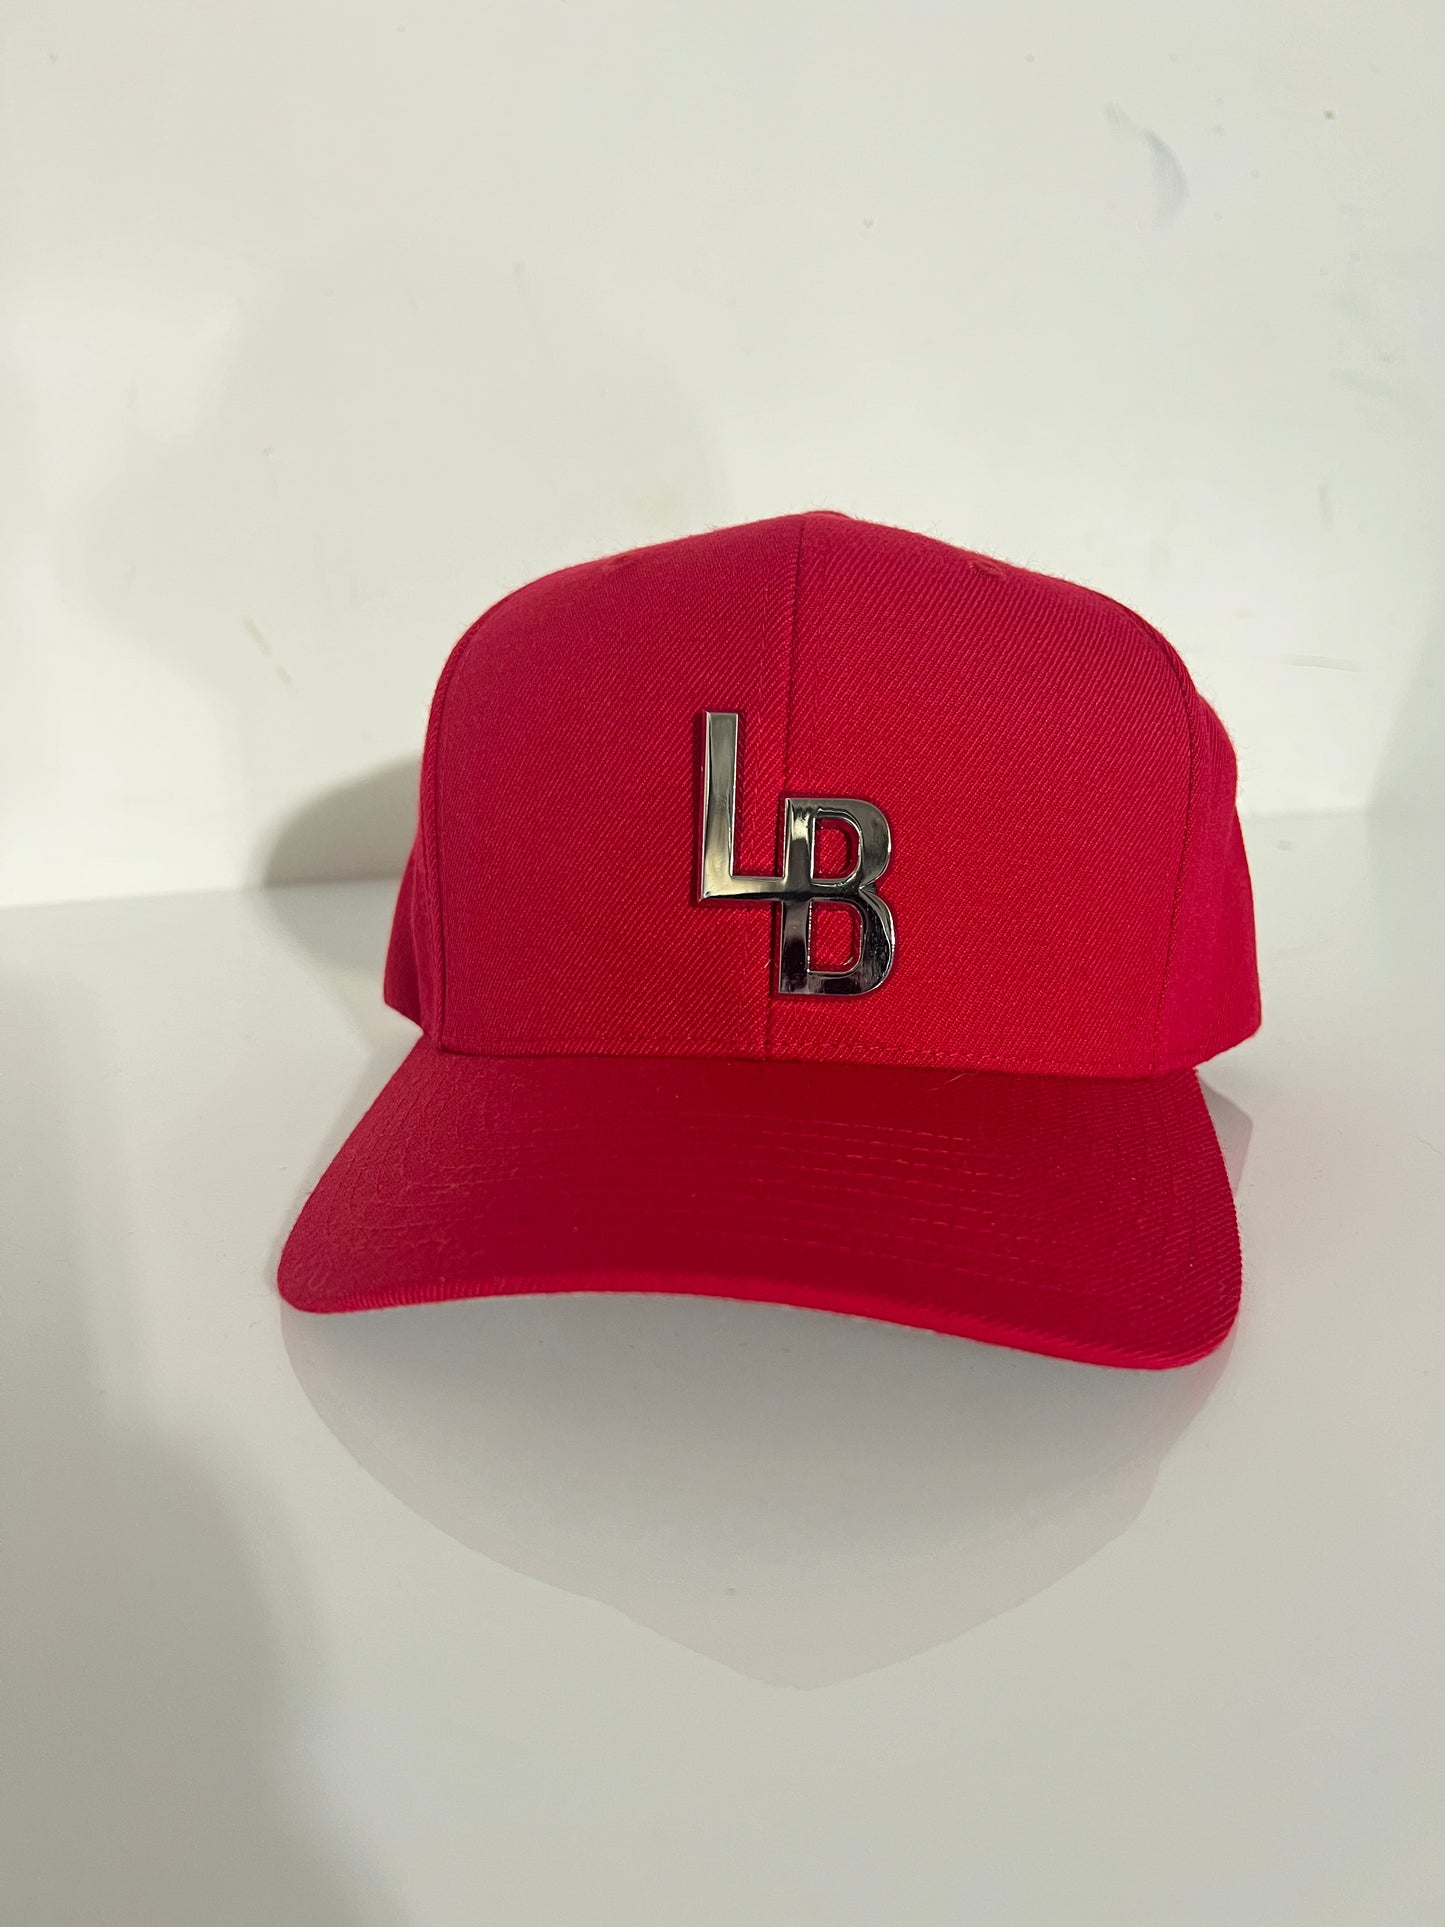 LB CHOME / RED SNAP BACK